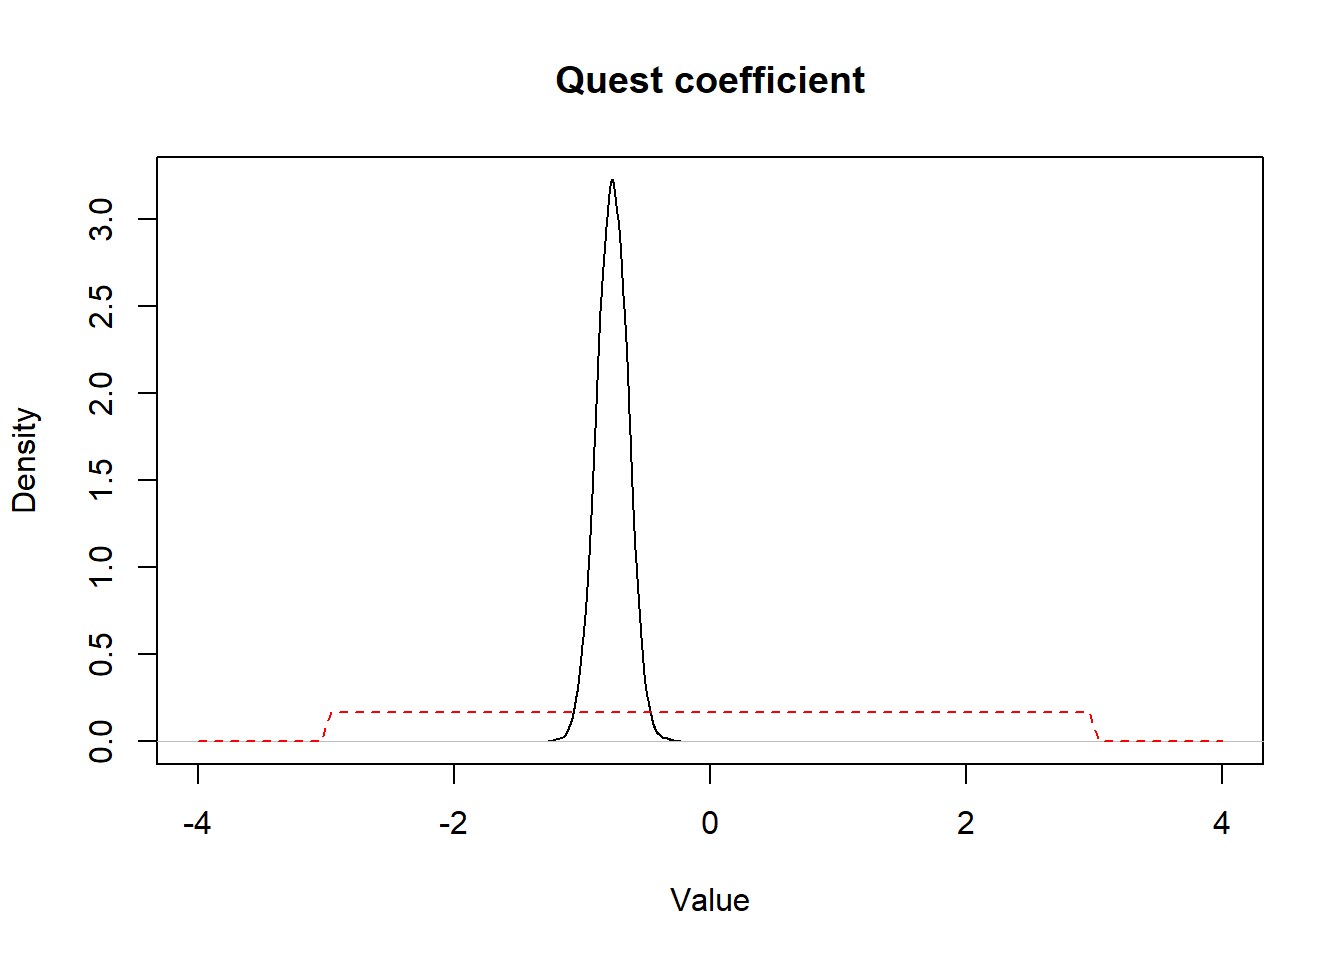 **Figure.** Prior (dashed red) and posterior (full black) distribution for *quest* coefficient.